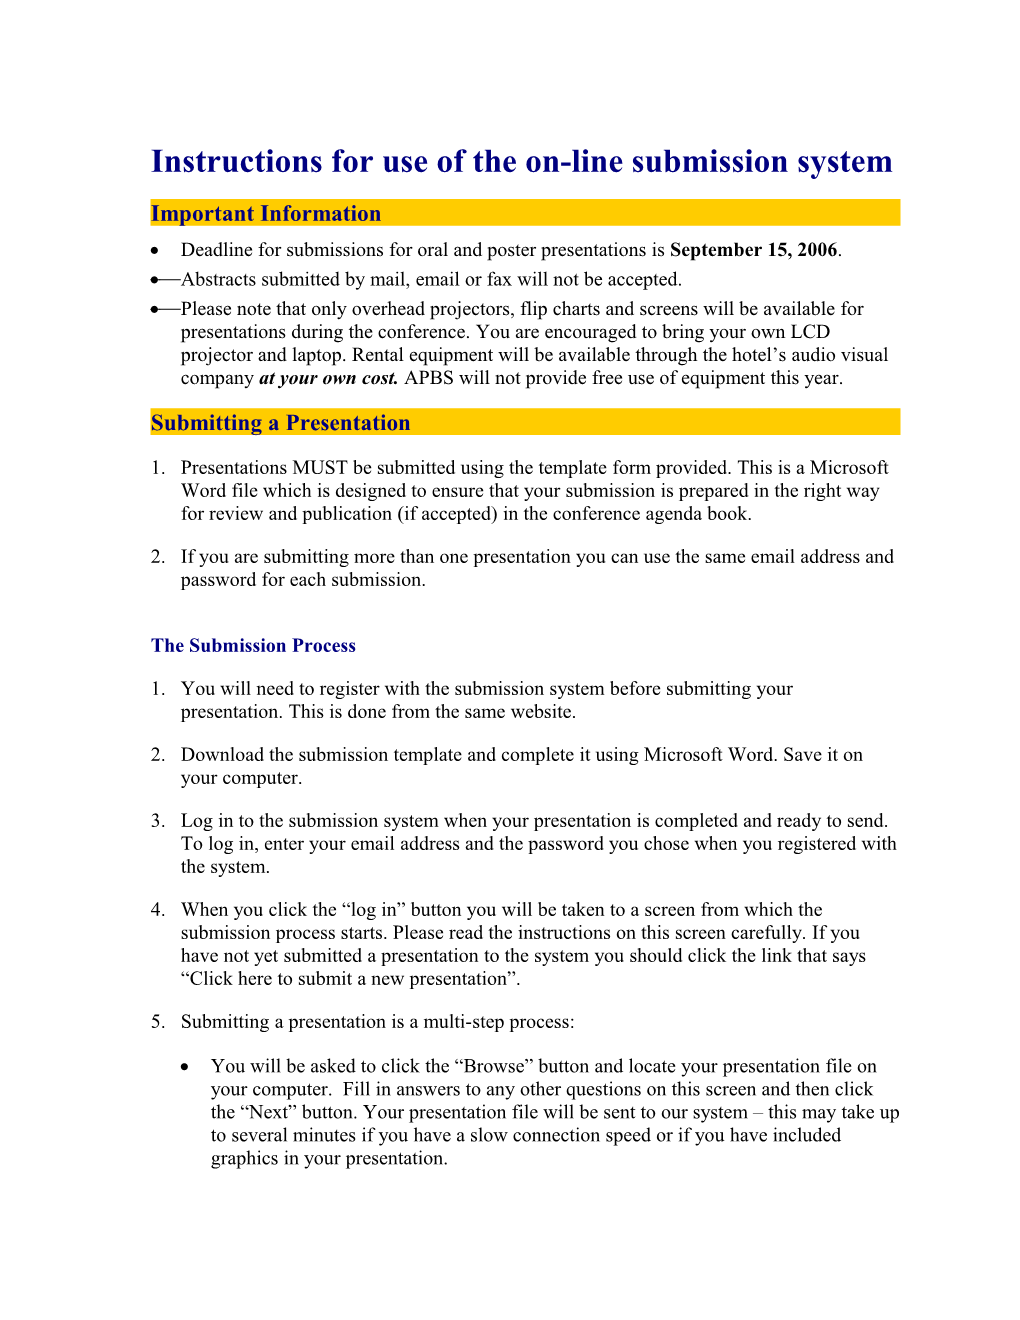 Instructions for Use of the On-Line Submission System